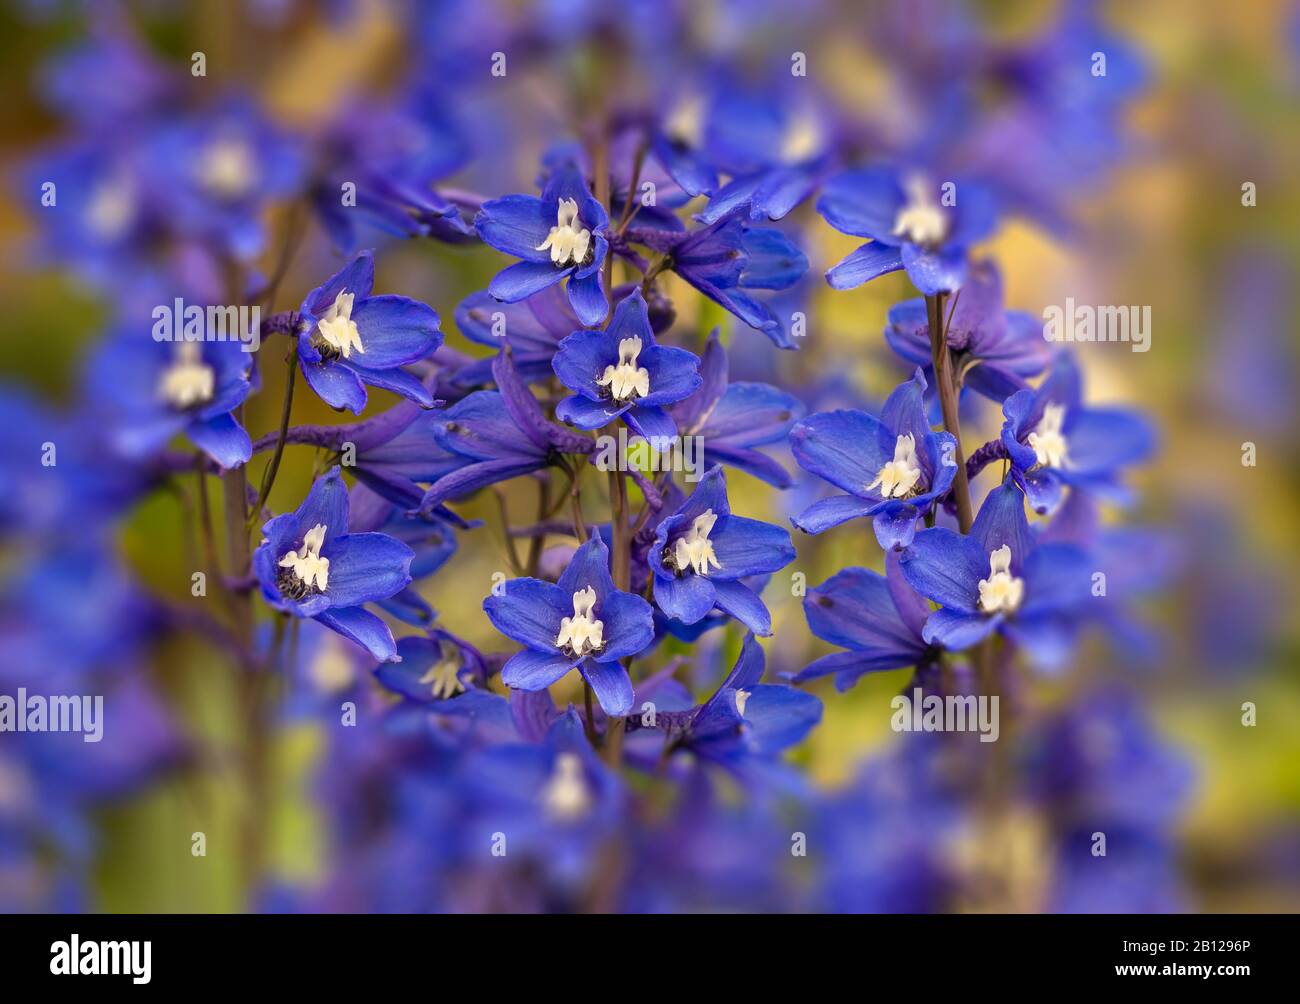 Section of blue windflower & stamens Stock Photo